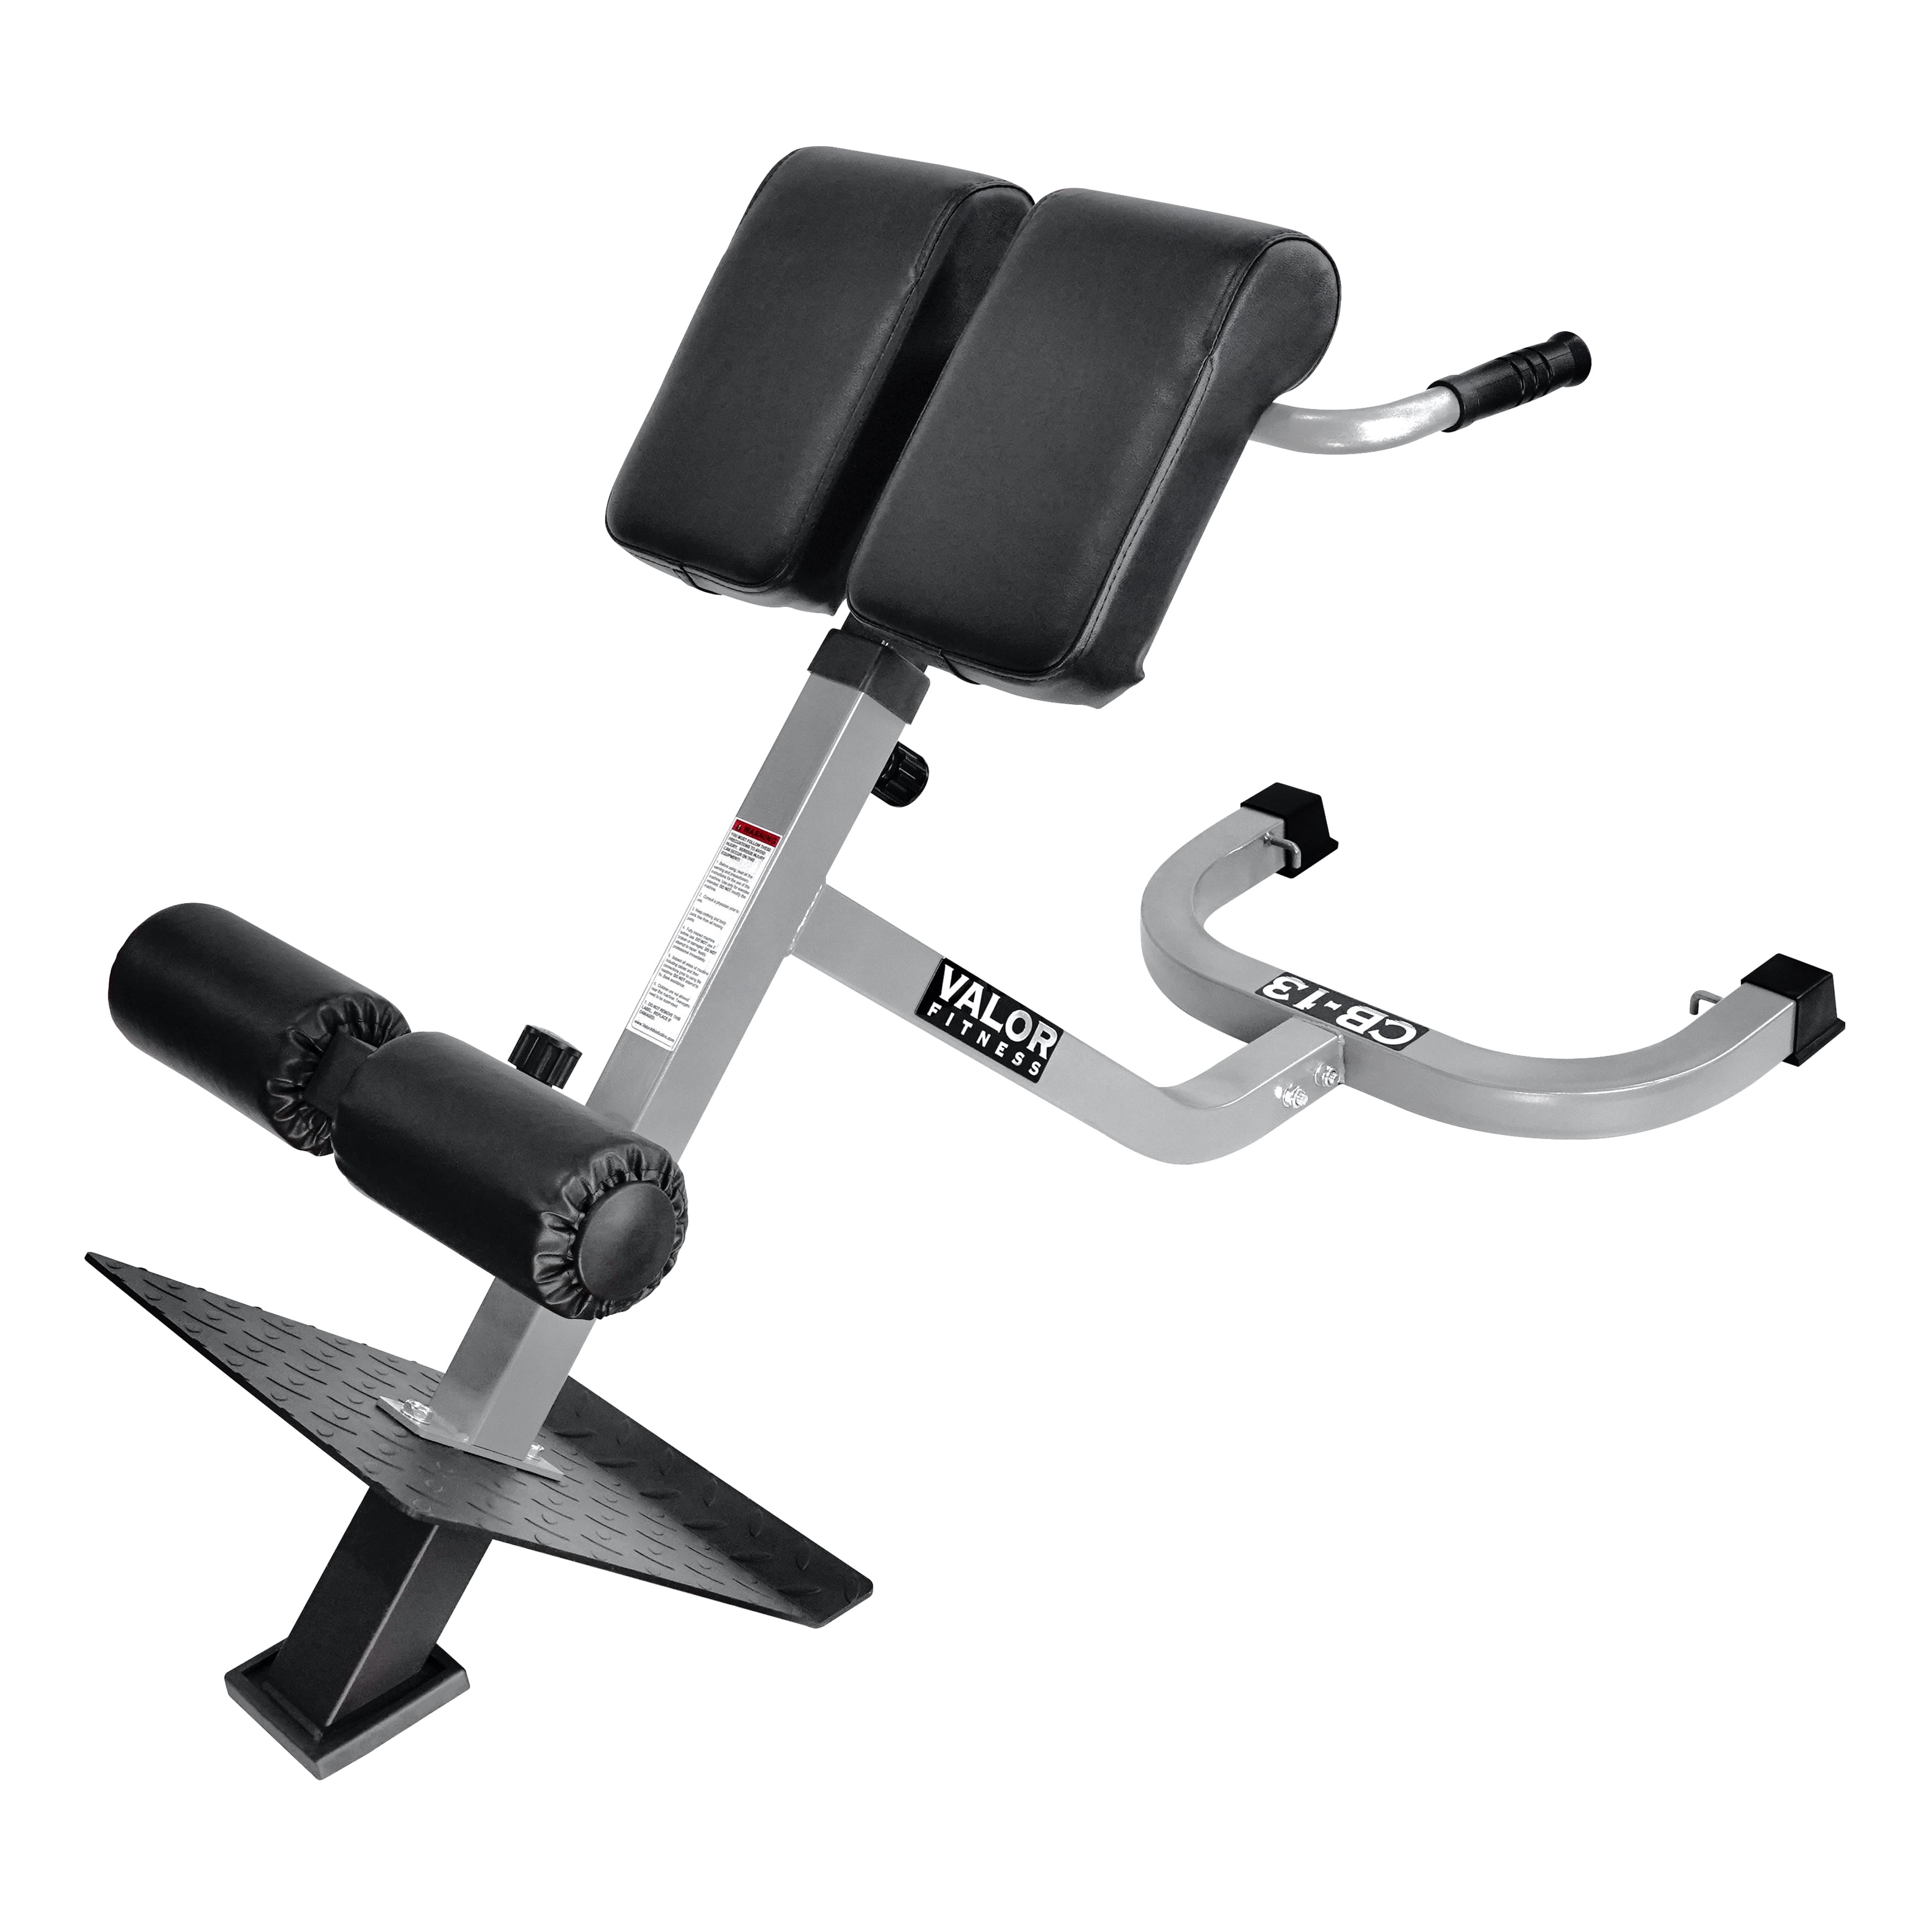 Valor Fitness Roman Chair Back Extension Machine - Adjustable, Band Pegs,  Bench for Glutes, Lower Back Strengthening Exercises - Waist Hyperextension  - Home Gym Workout – CB-13 